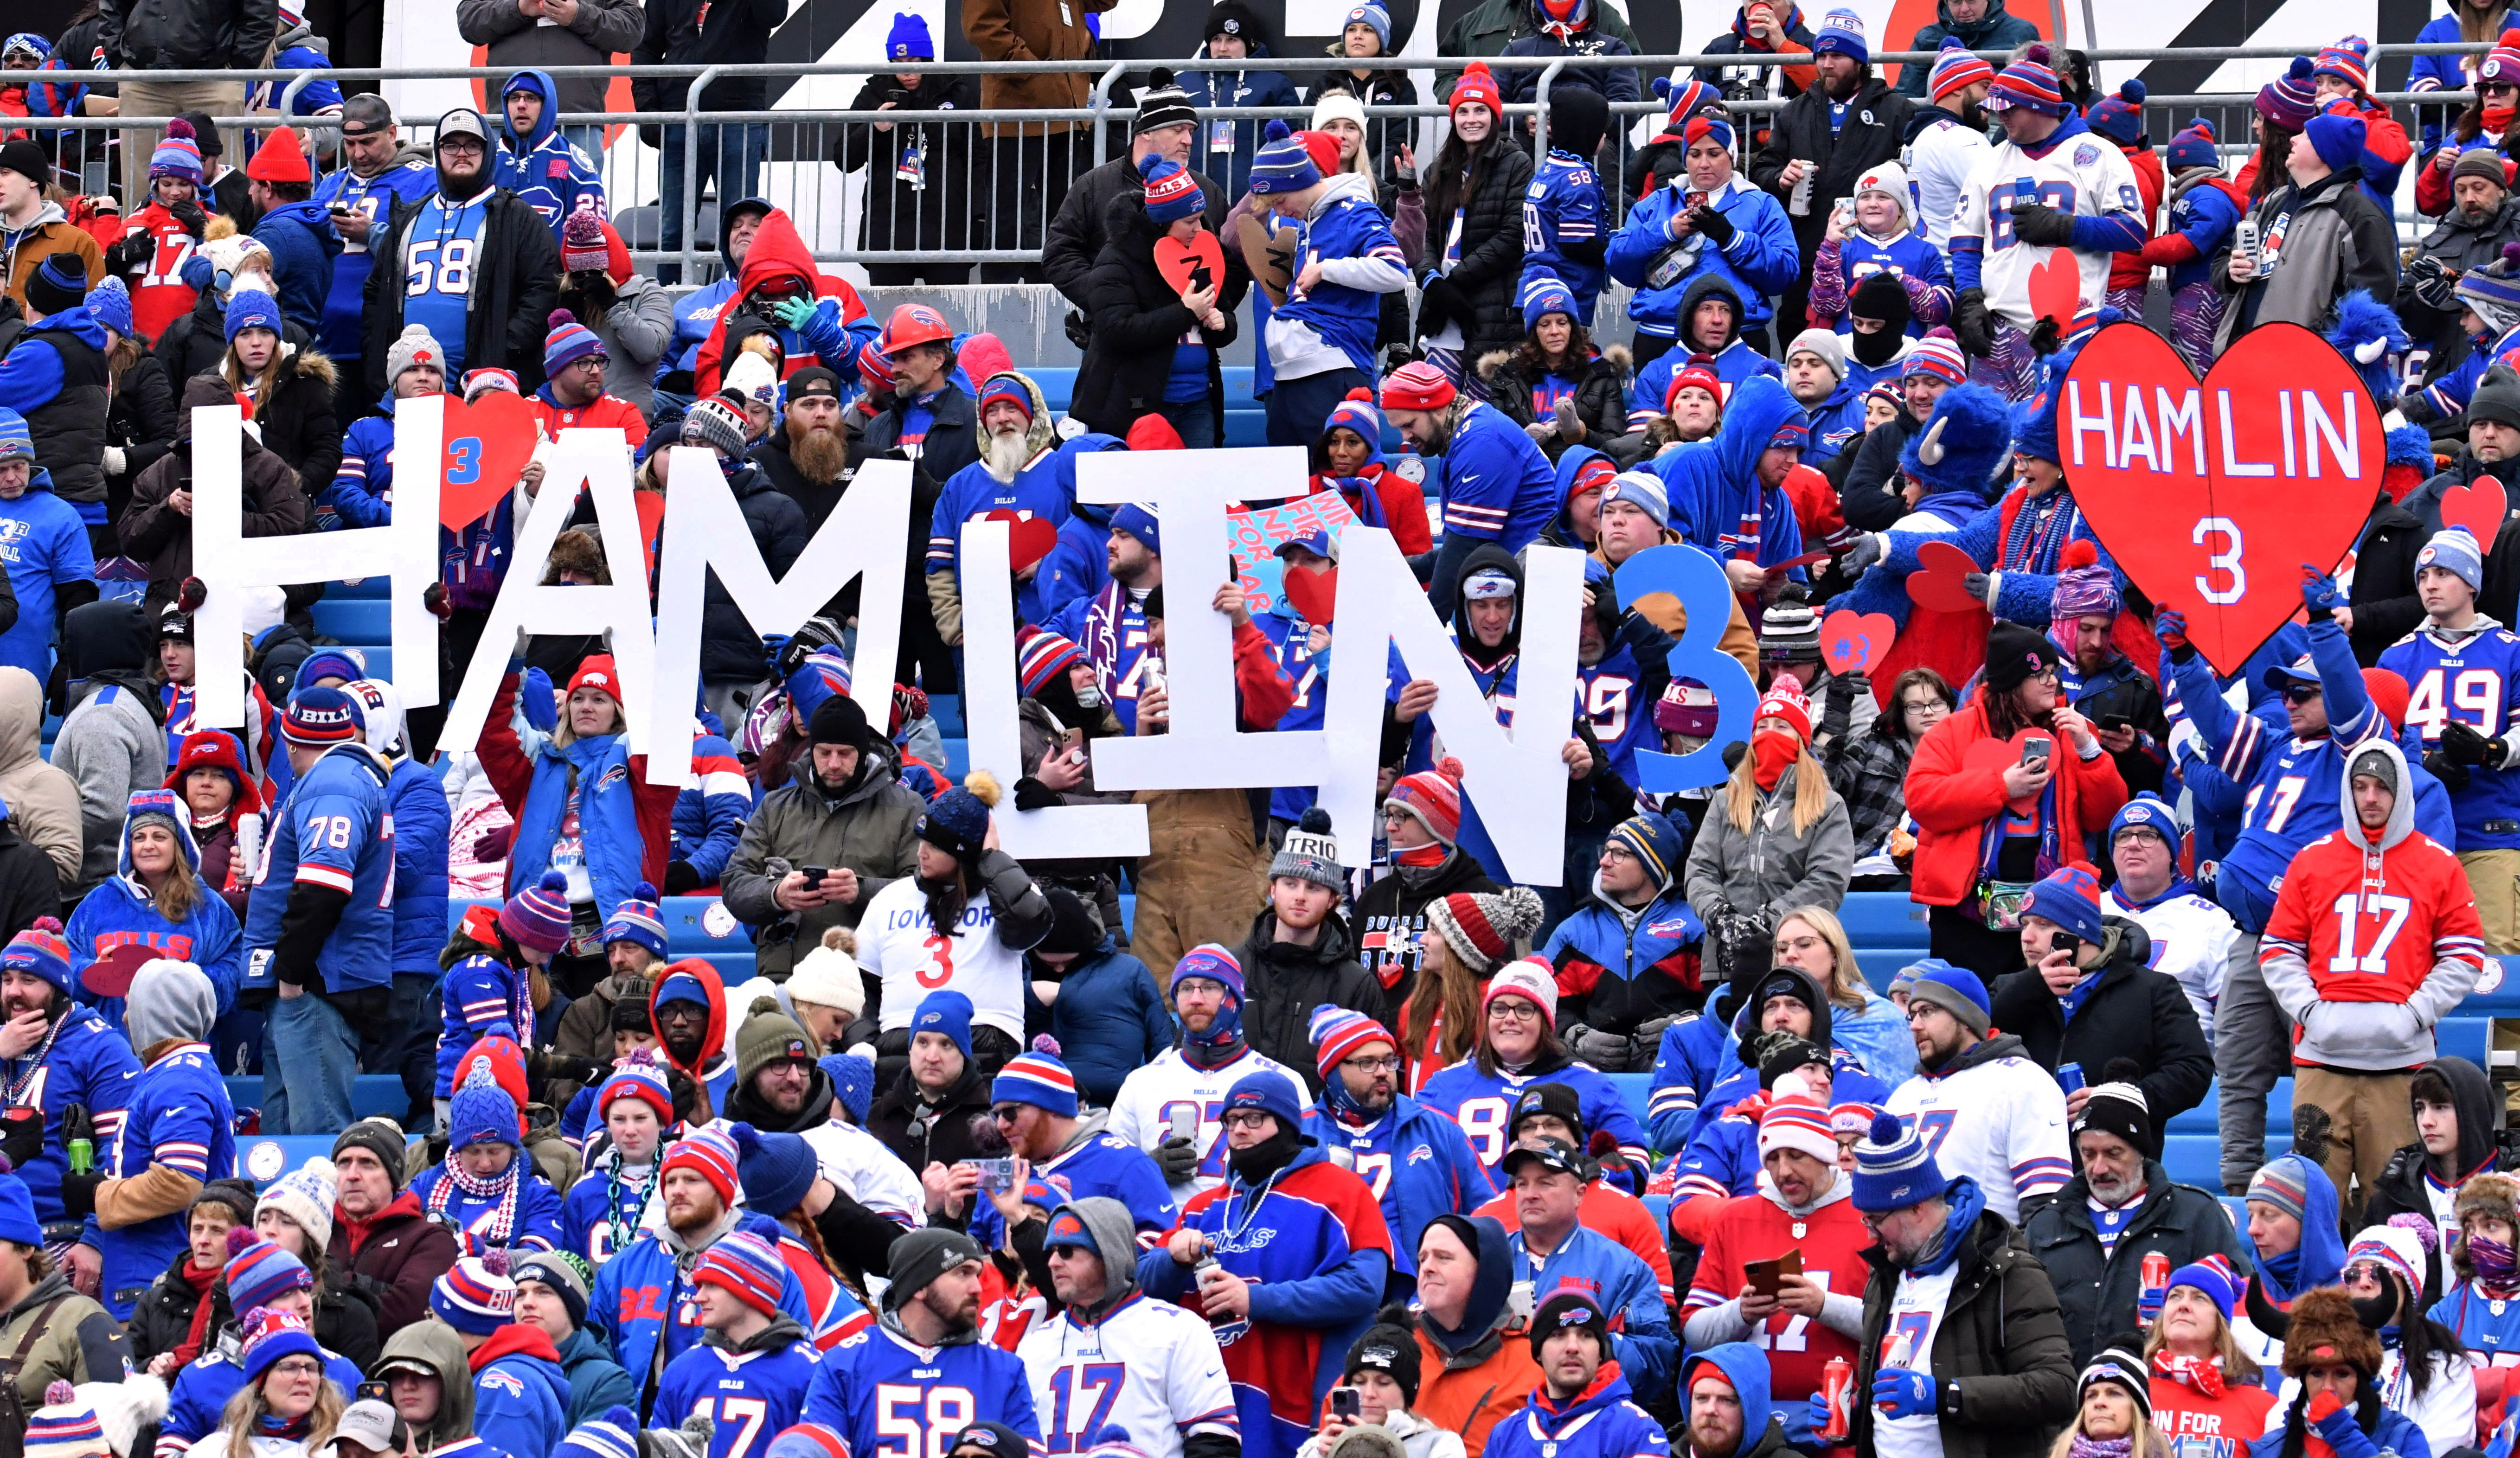 Buffalo Bills fans show their support for Damar Hamlin before a game against the New England Patriots at Highmark Stadium (Mandatory Credit: Mark Konezny-USA TODAY Sports TPX IMAGES OF THE DAY)